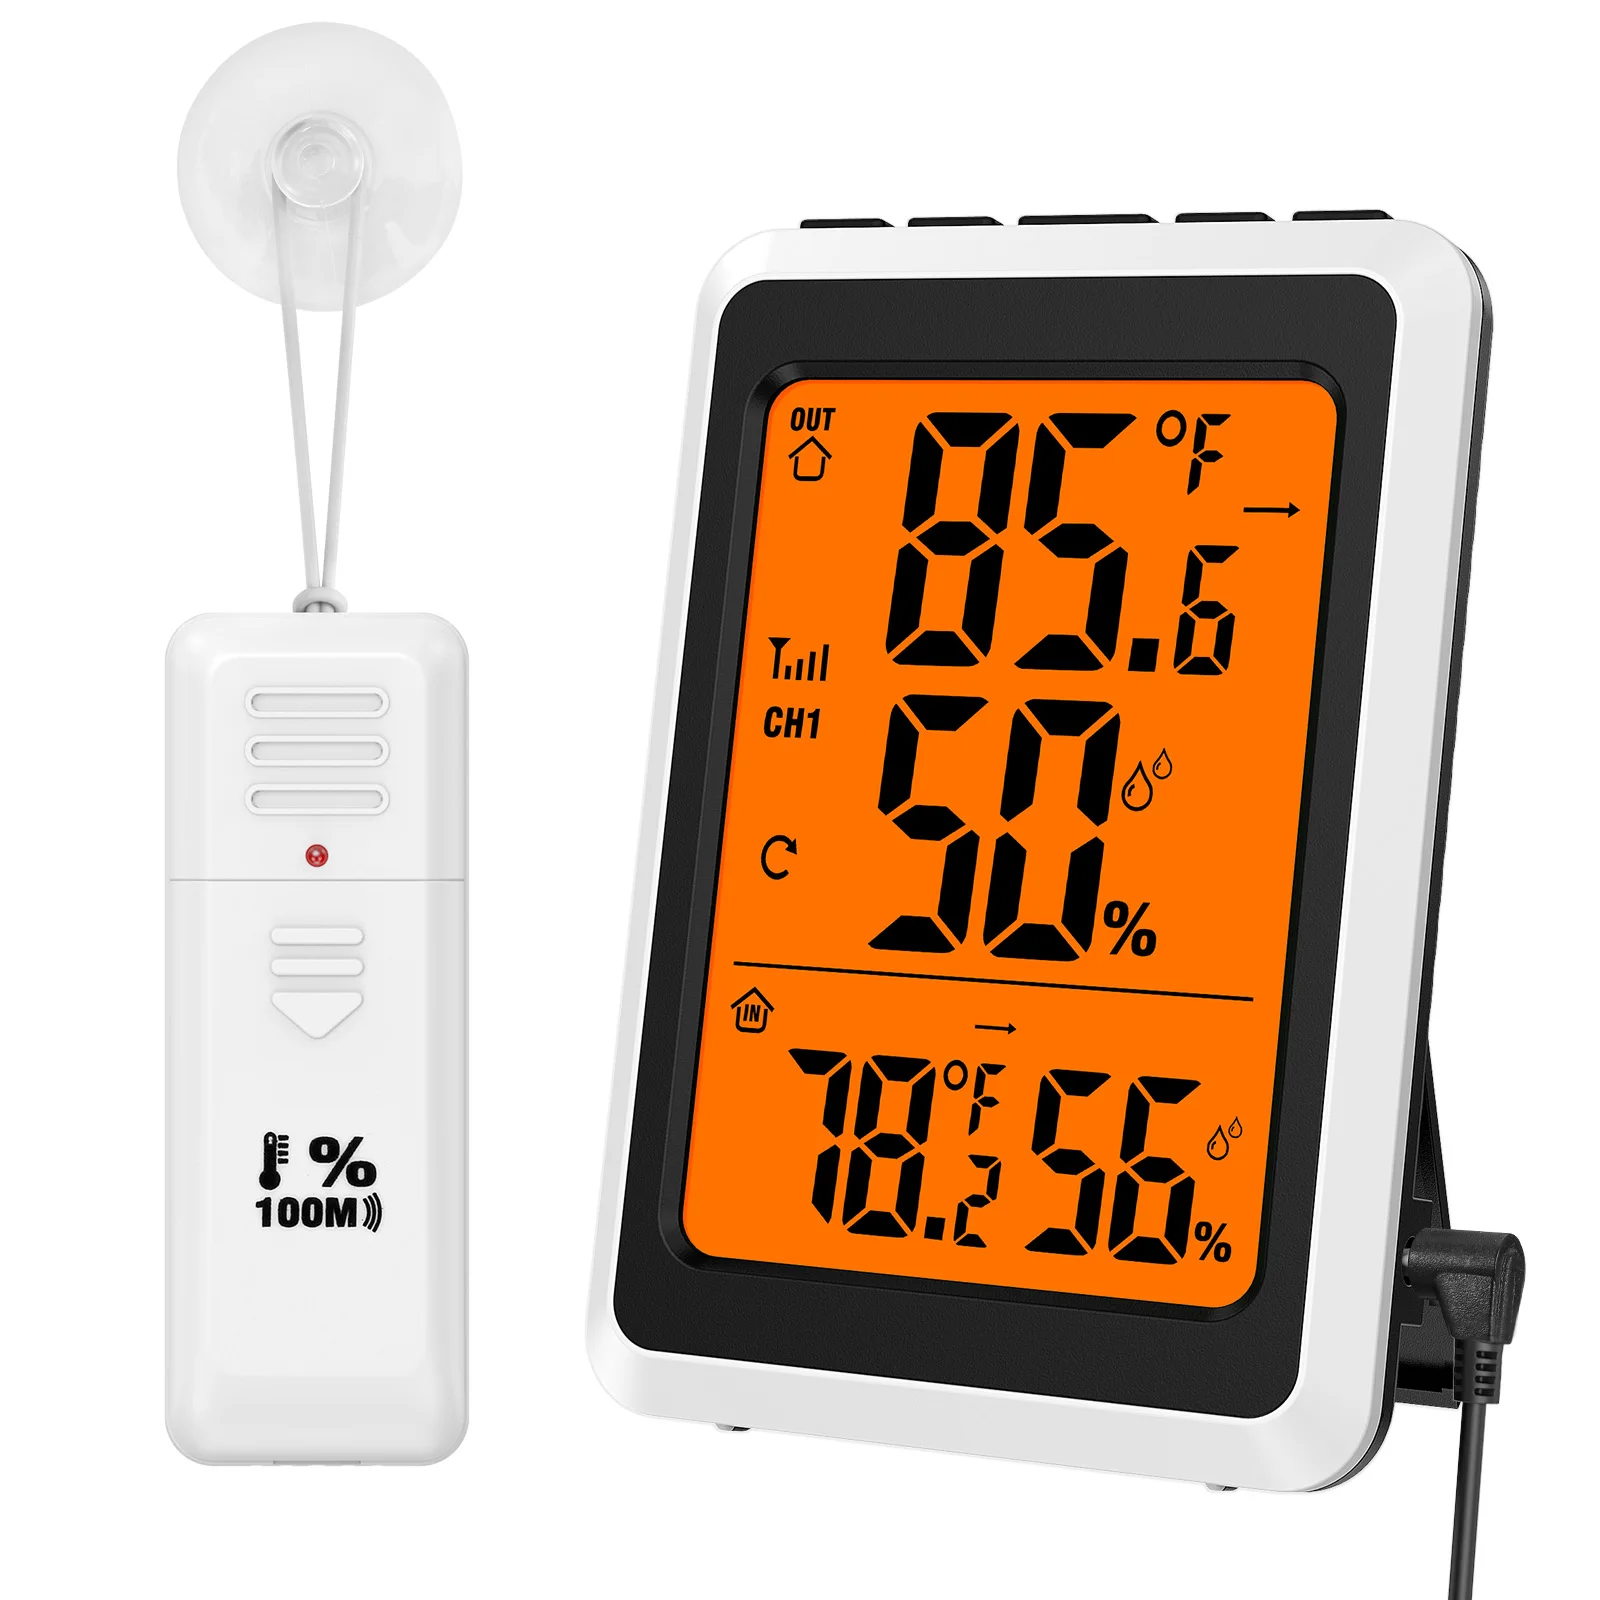 

ORIA Indoor Outdoor Thermometer Digital Electronic Wireless Hygrometer Humidity Gauge Temperature Monitor with Sensors